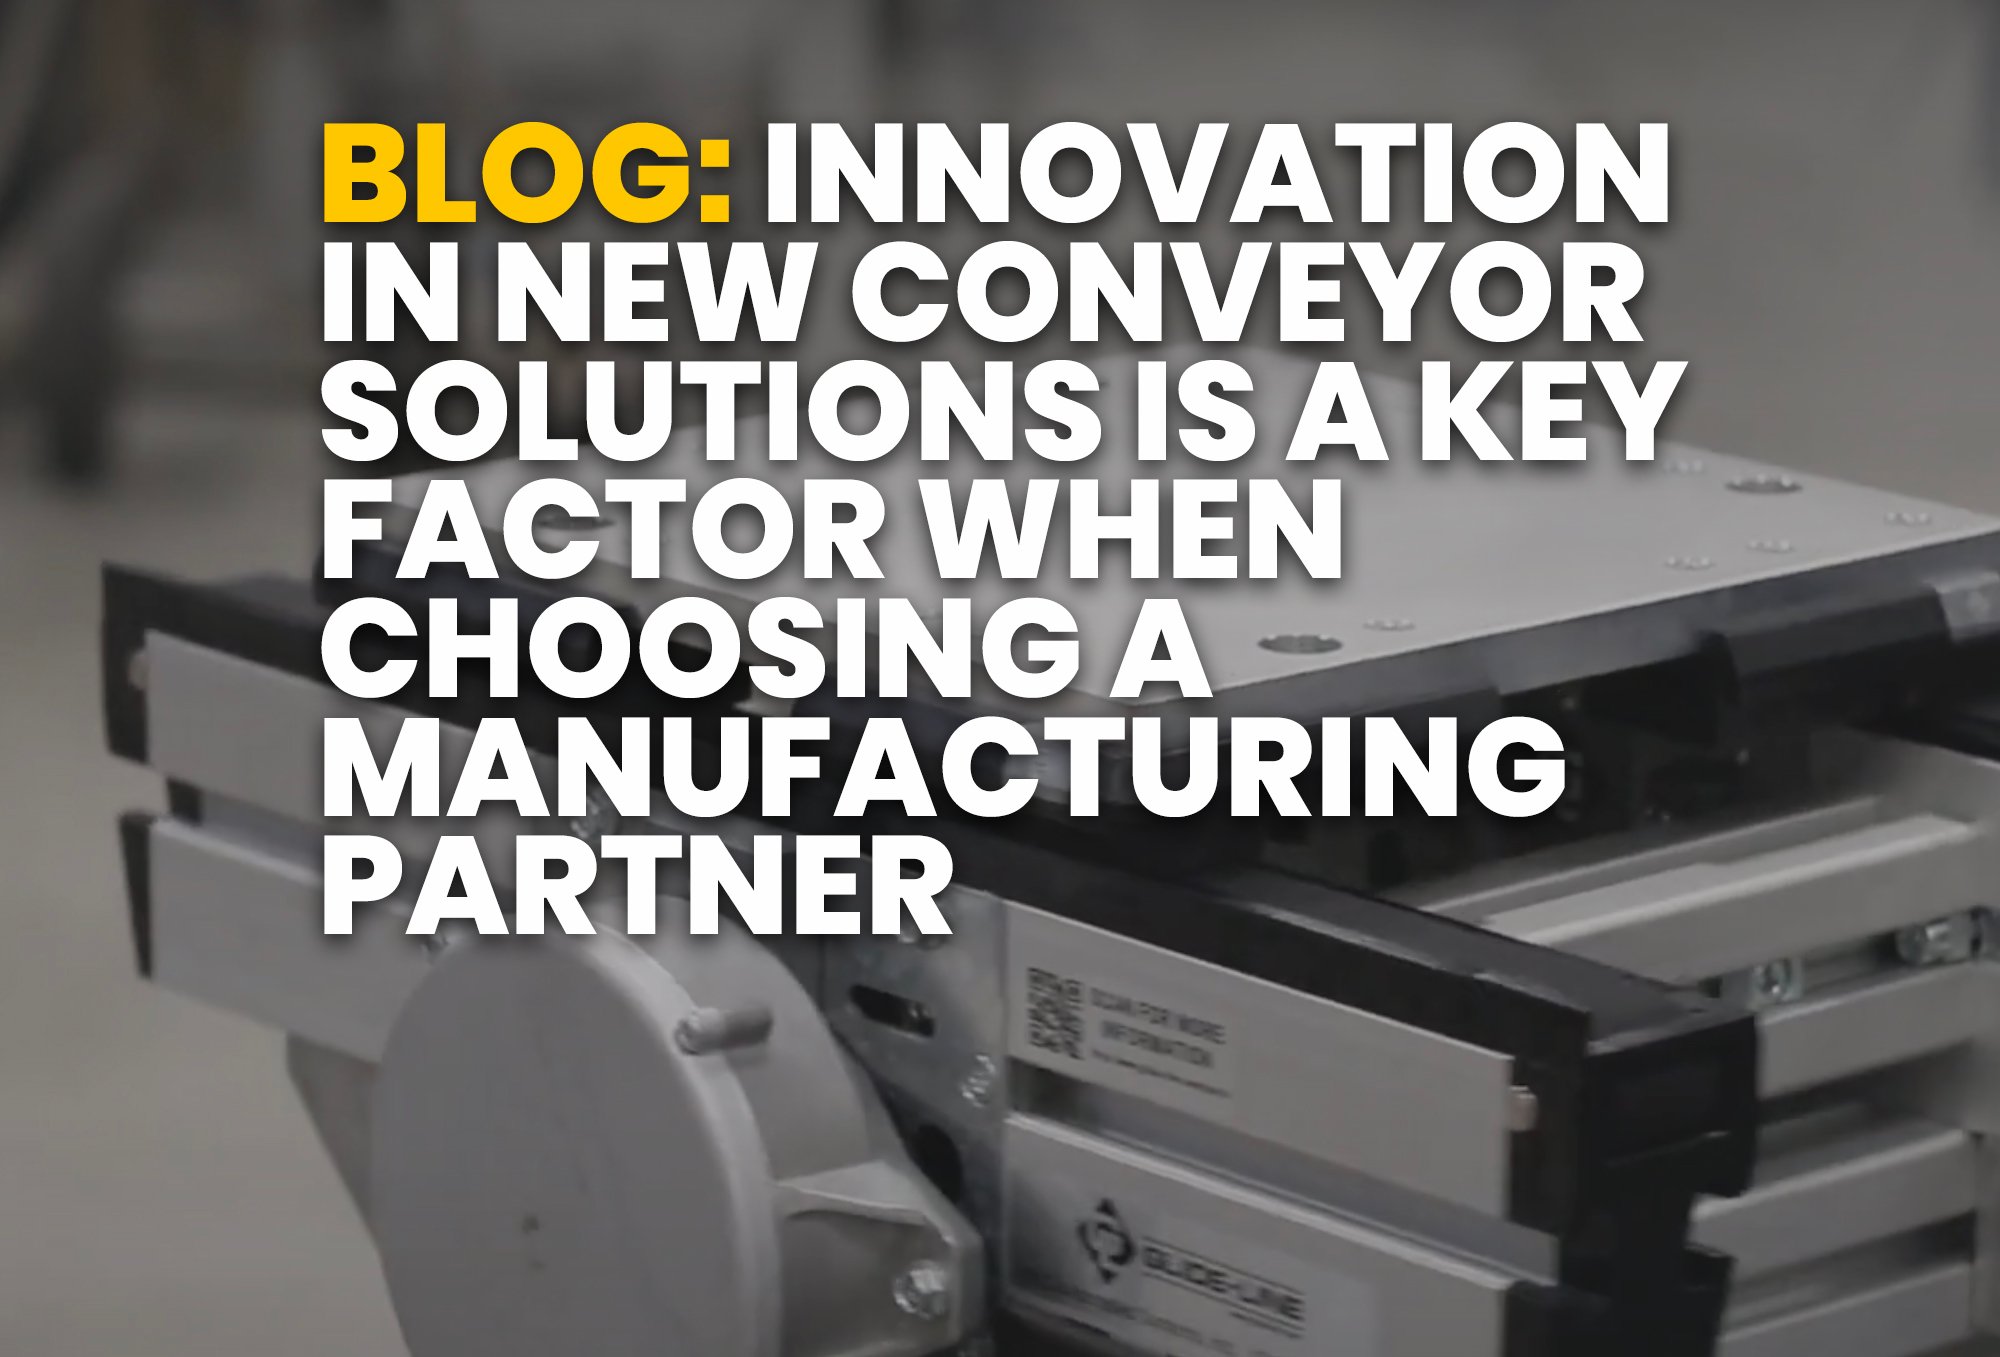 blog- INNOVATION IN NEW CONVEYOR SOLUTIONS IS A KEY FACTOR WHEN CHOOSING A MANUFACTURING PARTNER